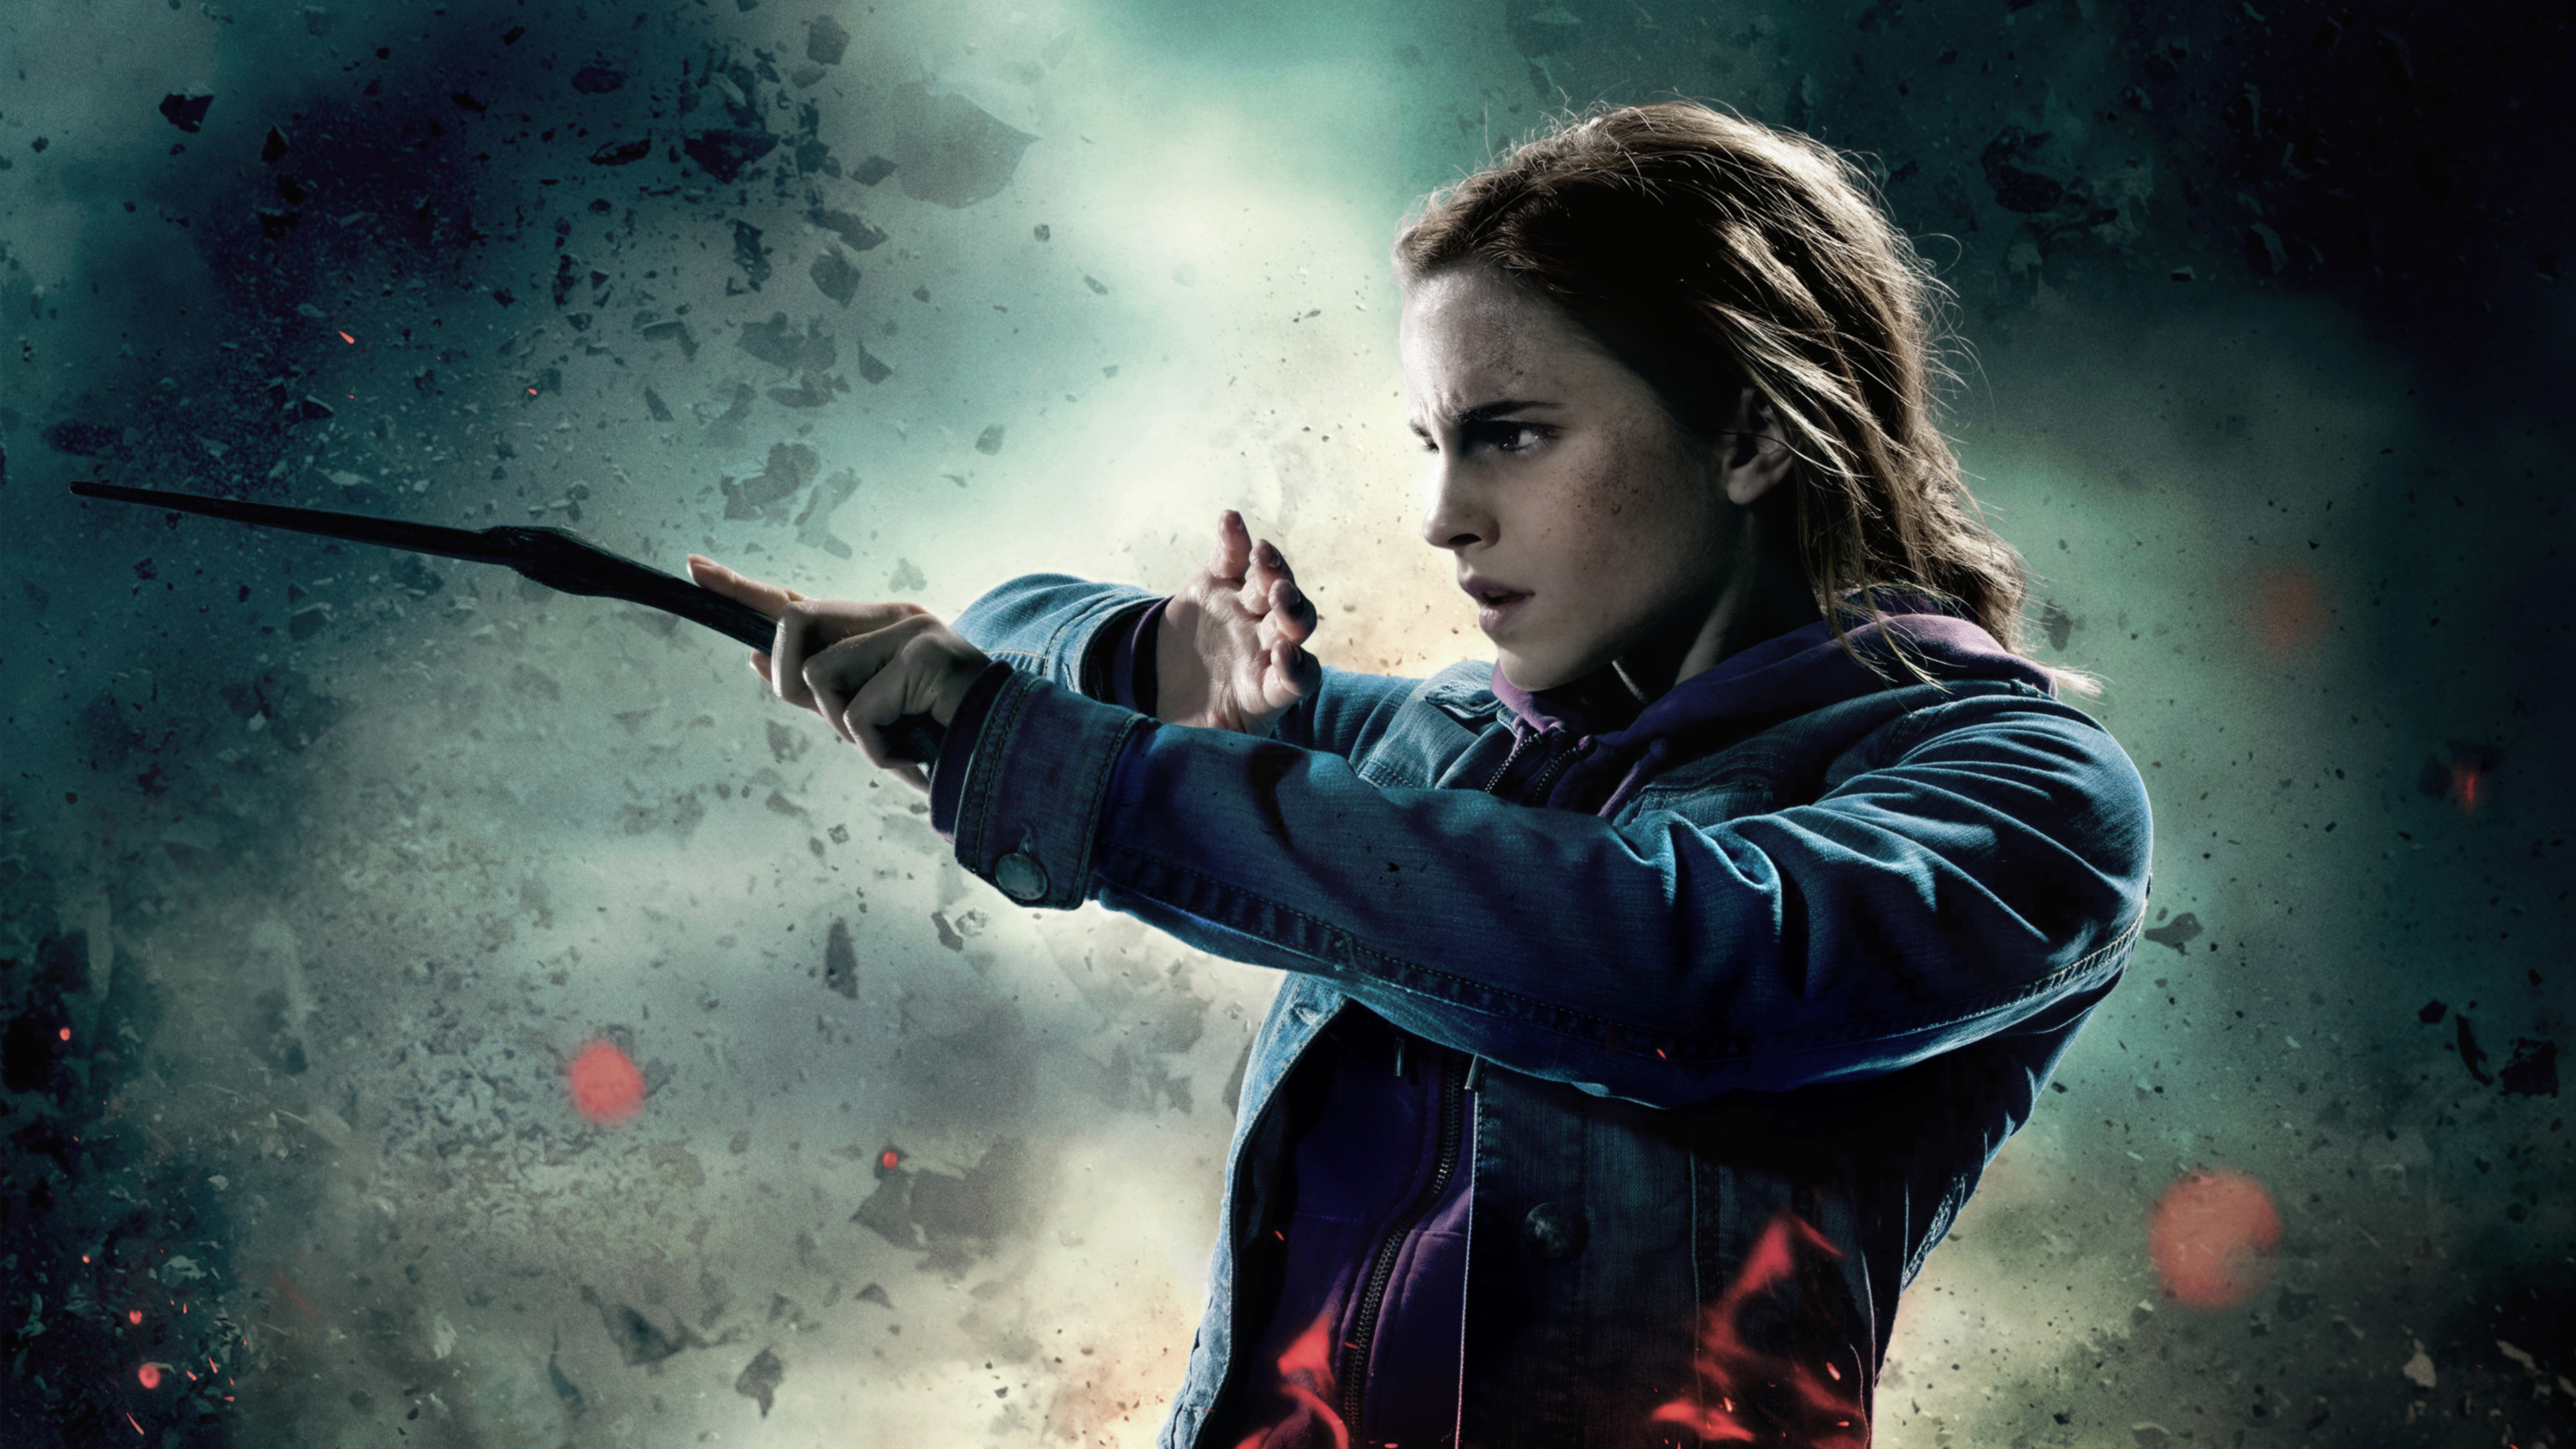 3840x2160 Hermione Harry Potter and the Deathly Hallows Part 2